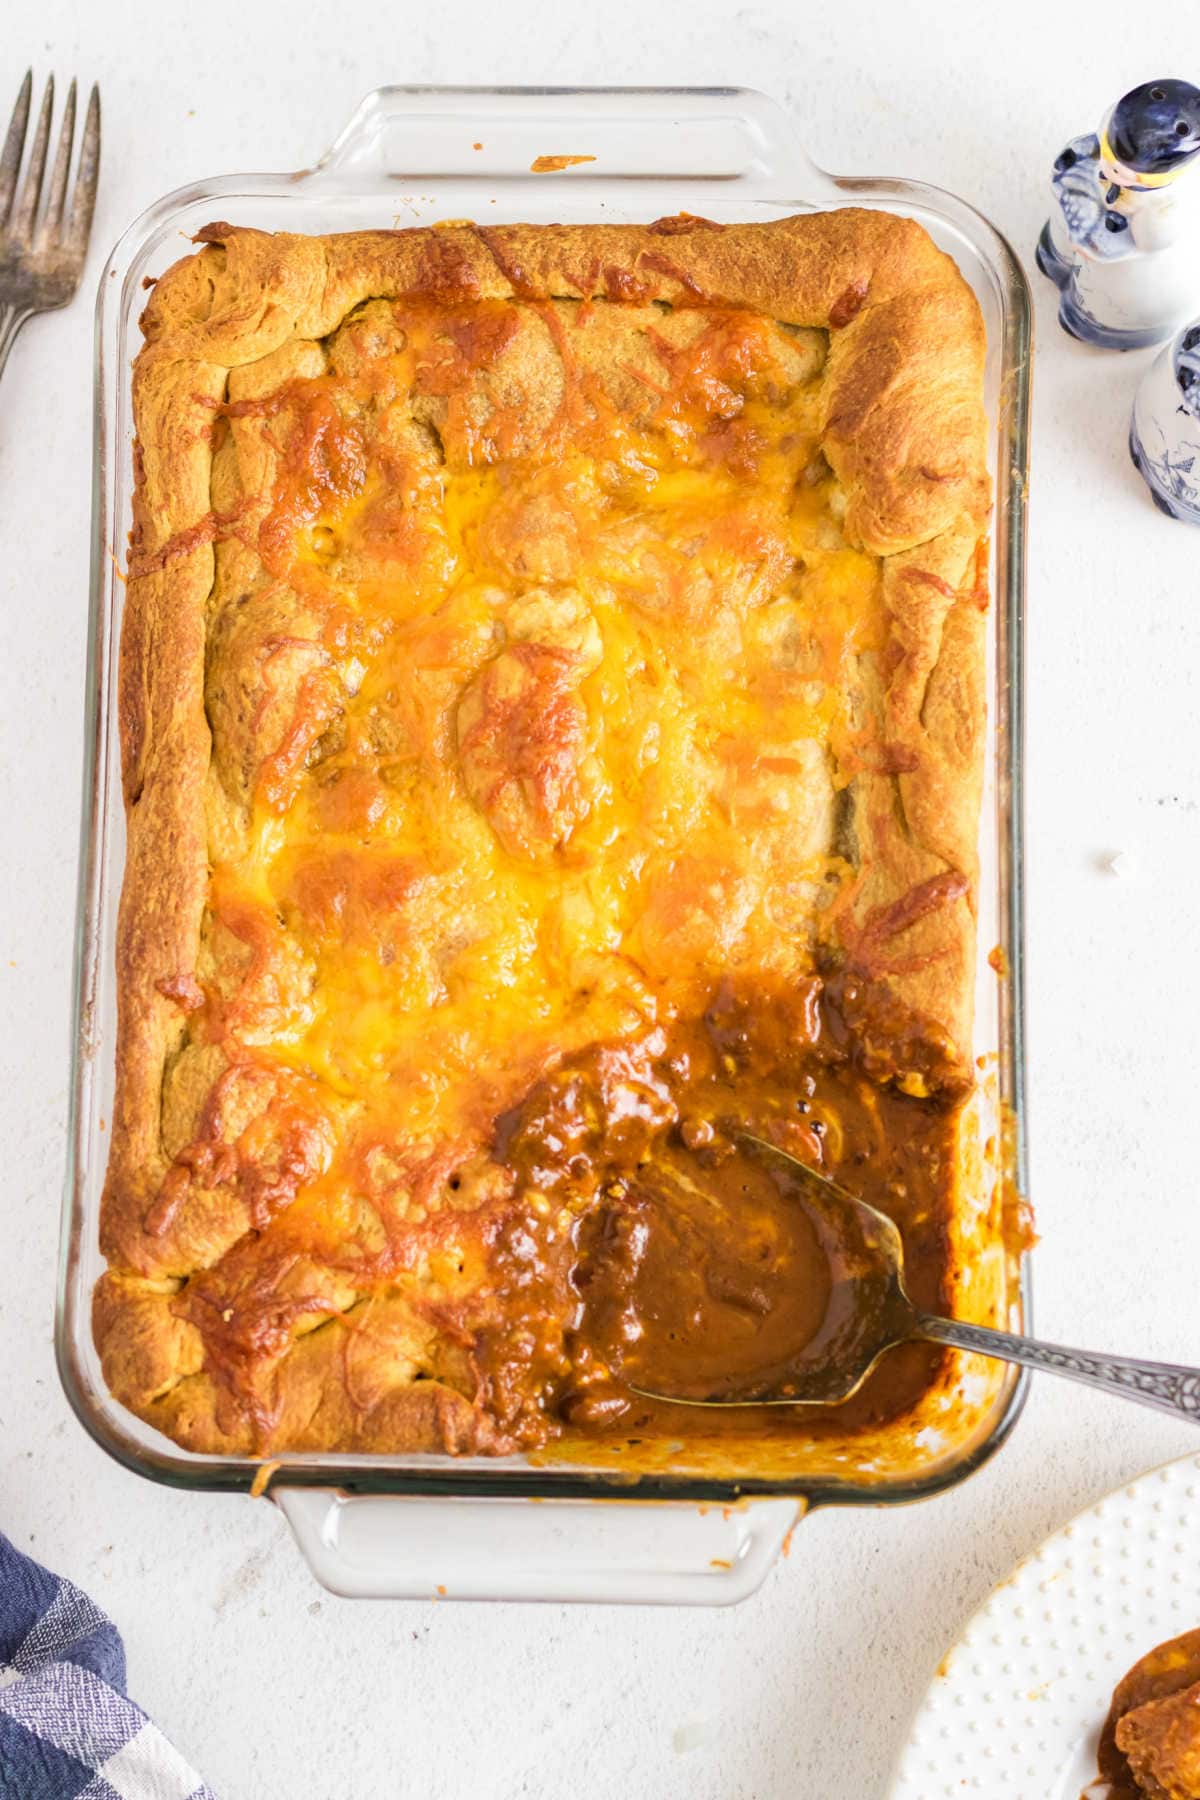 Casserole dish with a serving removed to show the chili dog filling and crispy, cheesy crust.